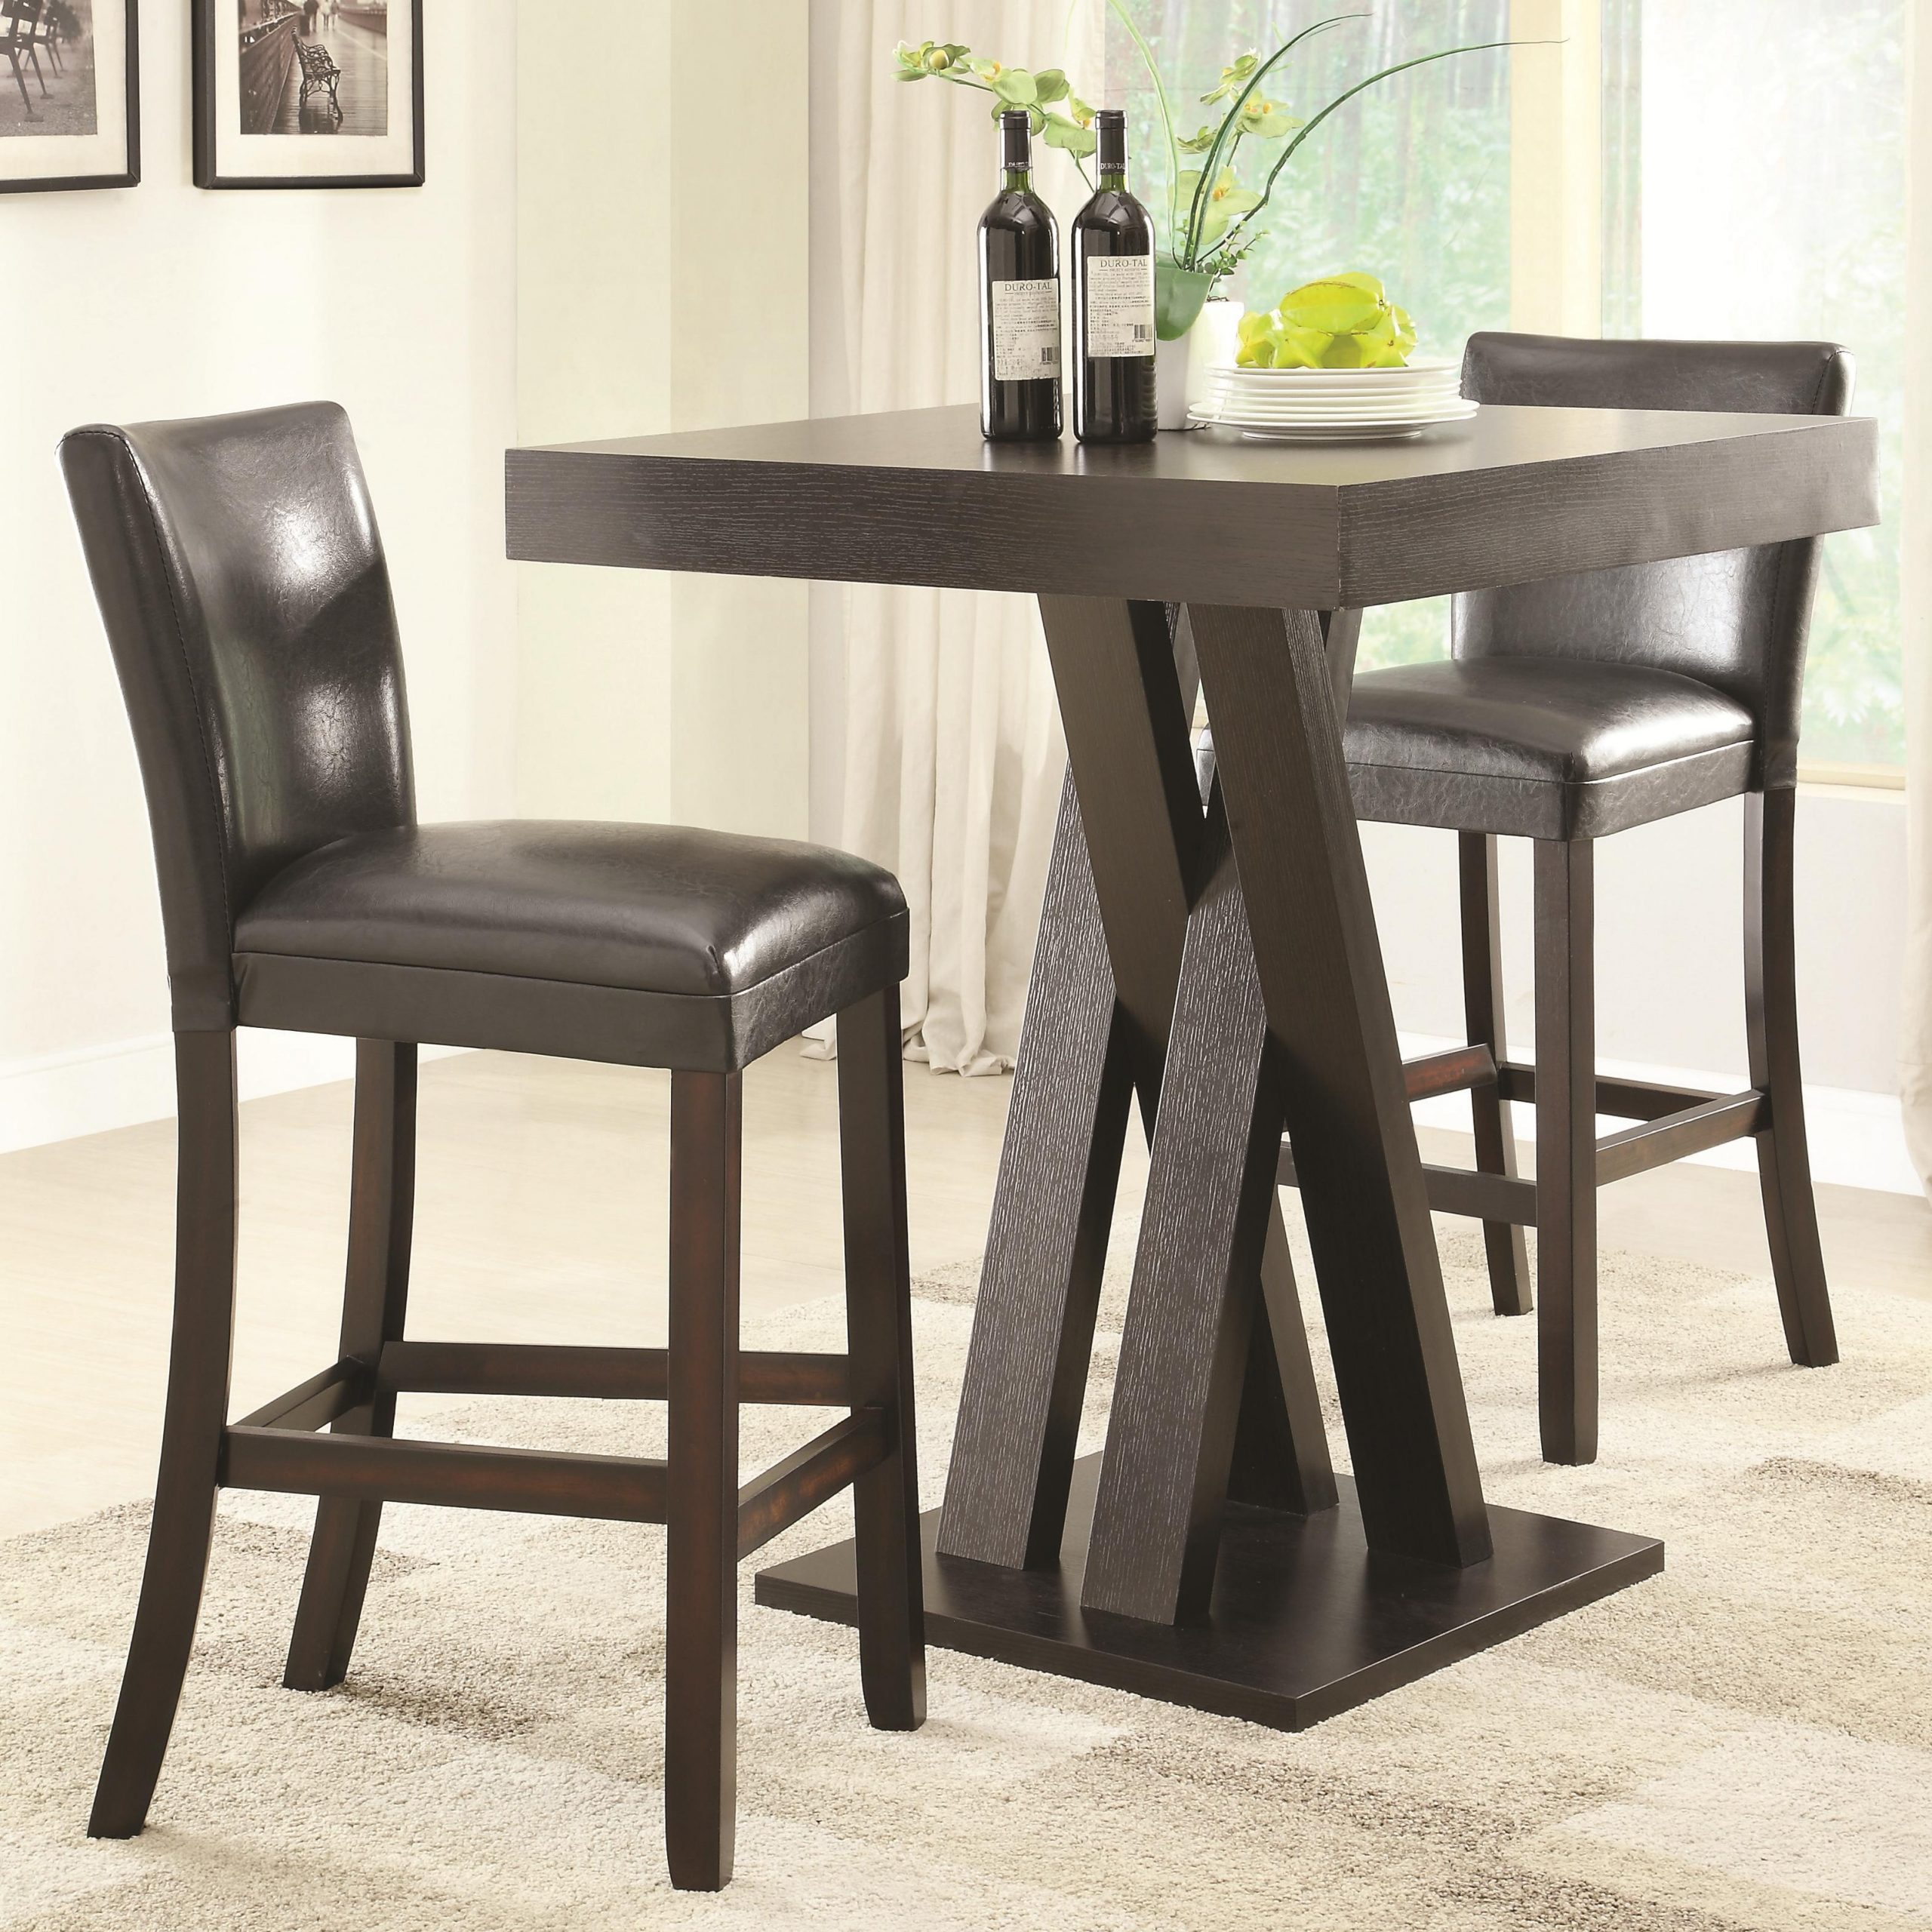 Coaster Selva 3pc Cappuccino Counter Height Dining Room Set with regard to proportions 3139 X 3139